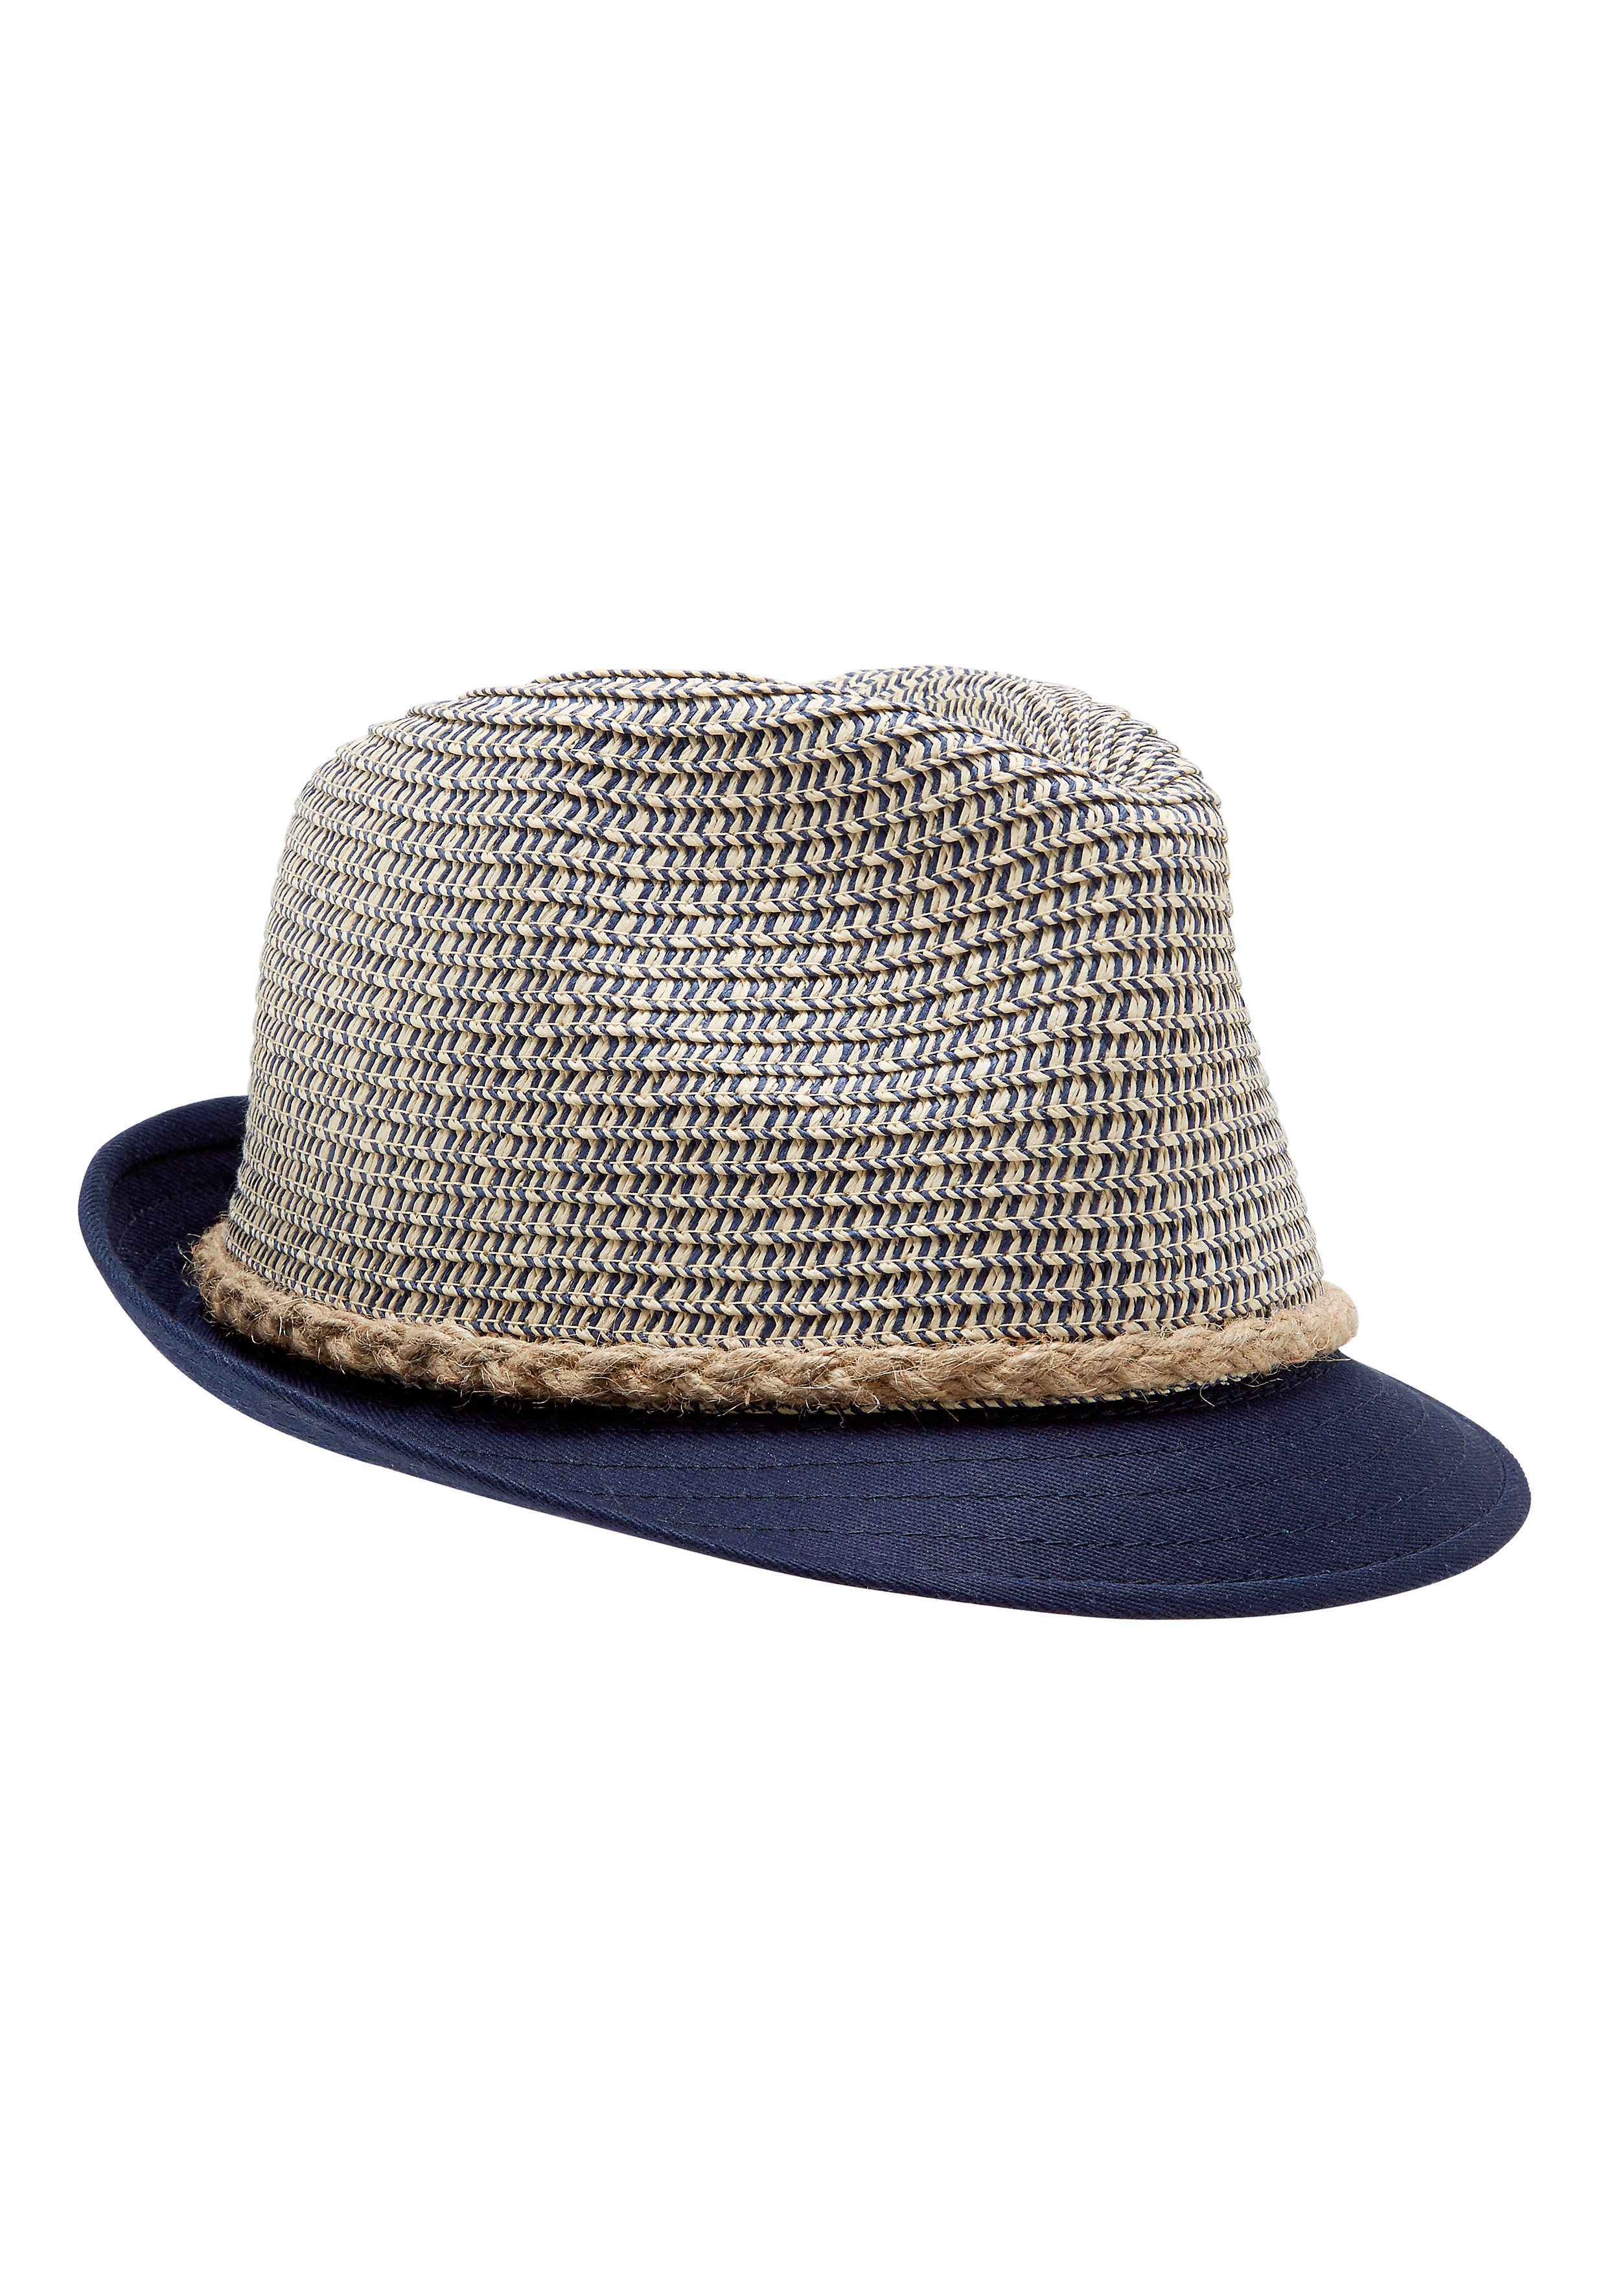 Mothercare | Boys Two Tone Straw Hat - Navy 0